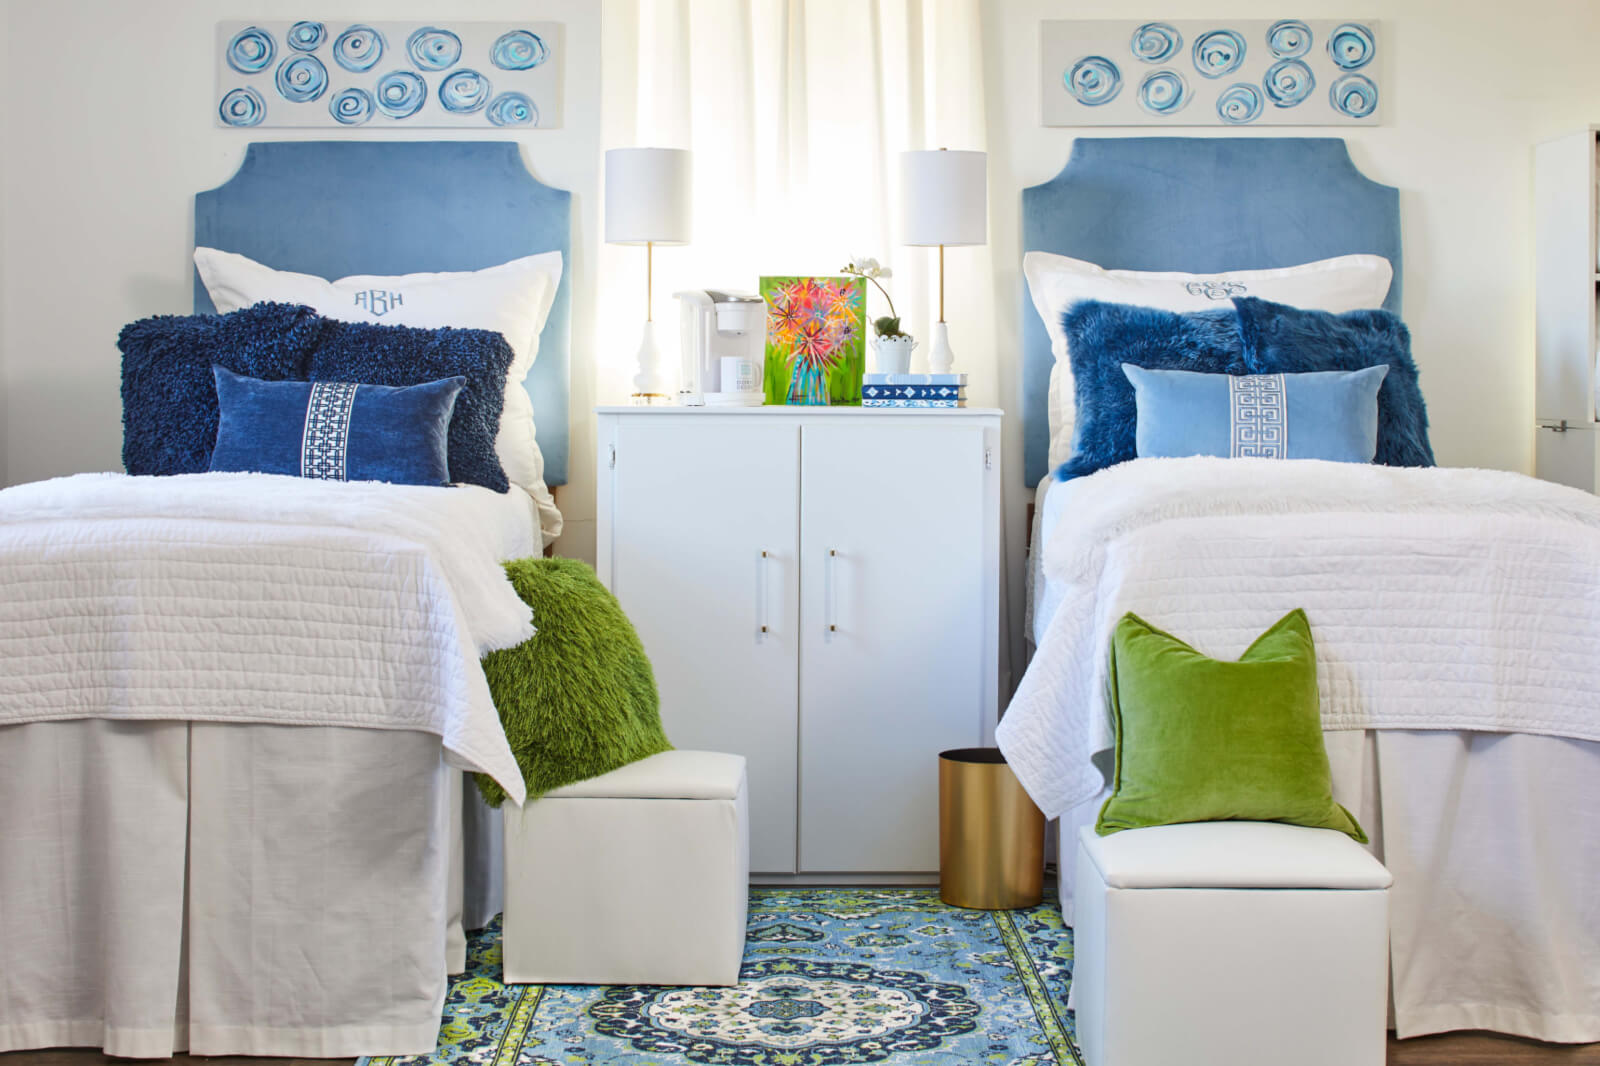 Looking for Dorm Room Ideas? Start with These 6 Essentials